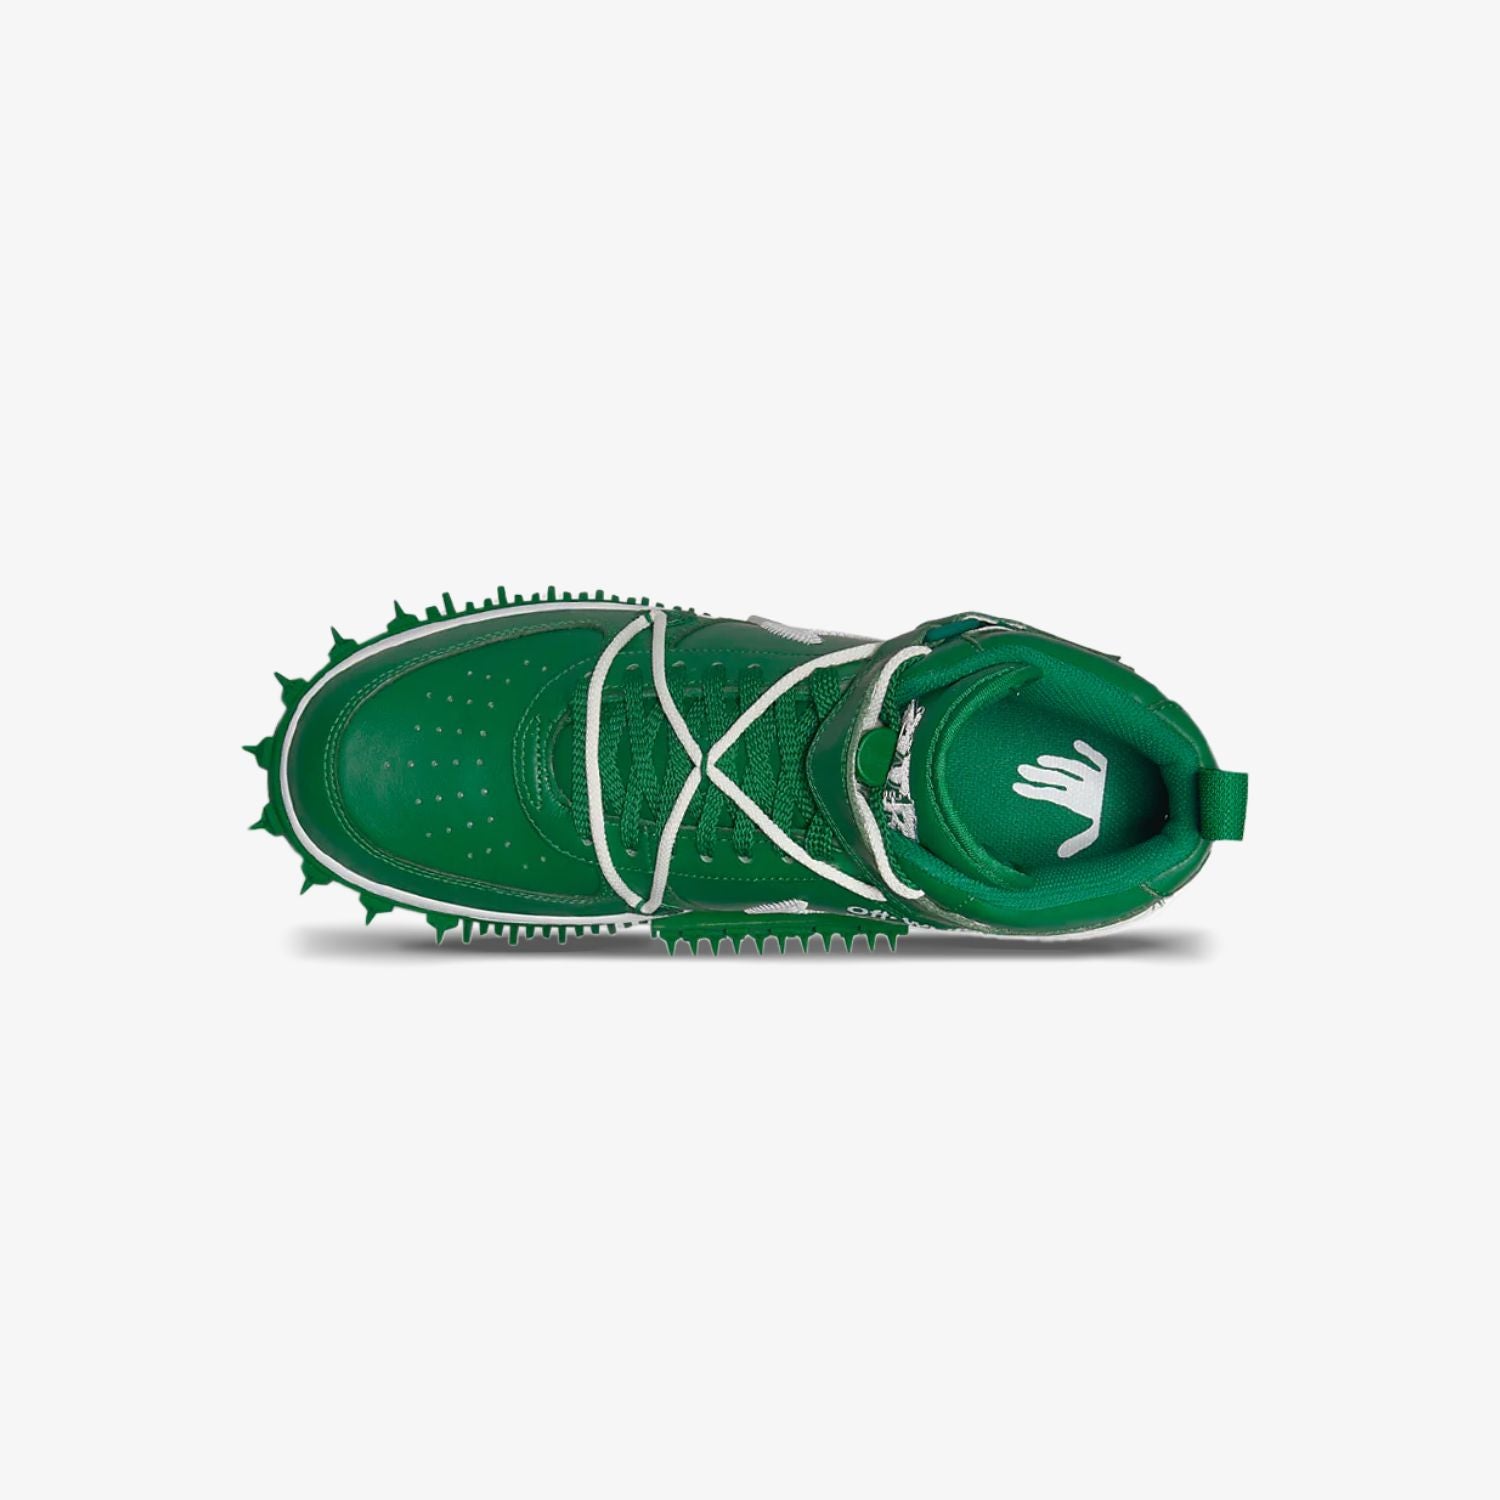 off-white-nike-air-force-1-pine-green-DR0500-300-unfazed-3_1